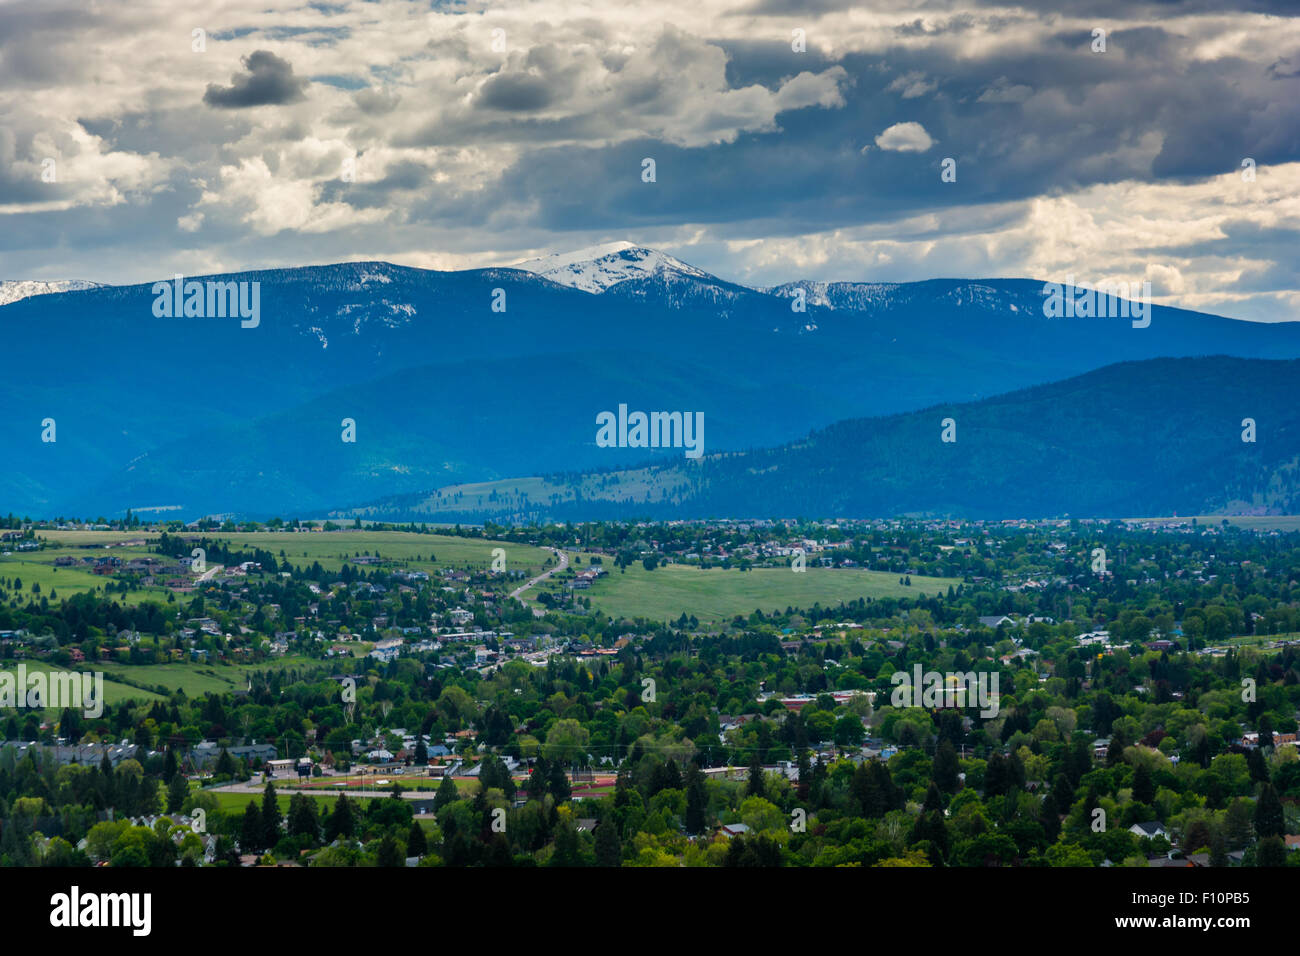 Distant mountains outside of Missoula, seen from Mount Sentinel, in Missoula, Montana. Stock Photo